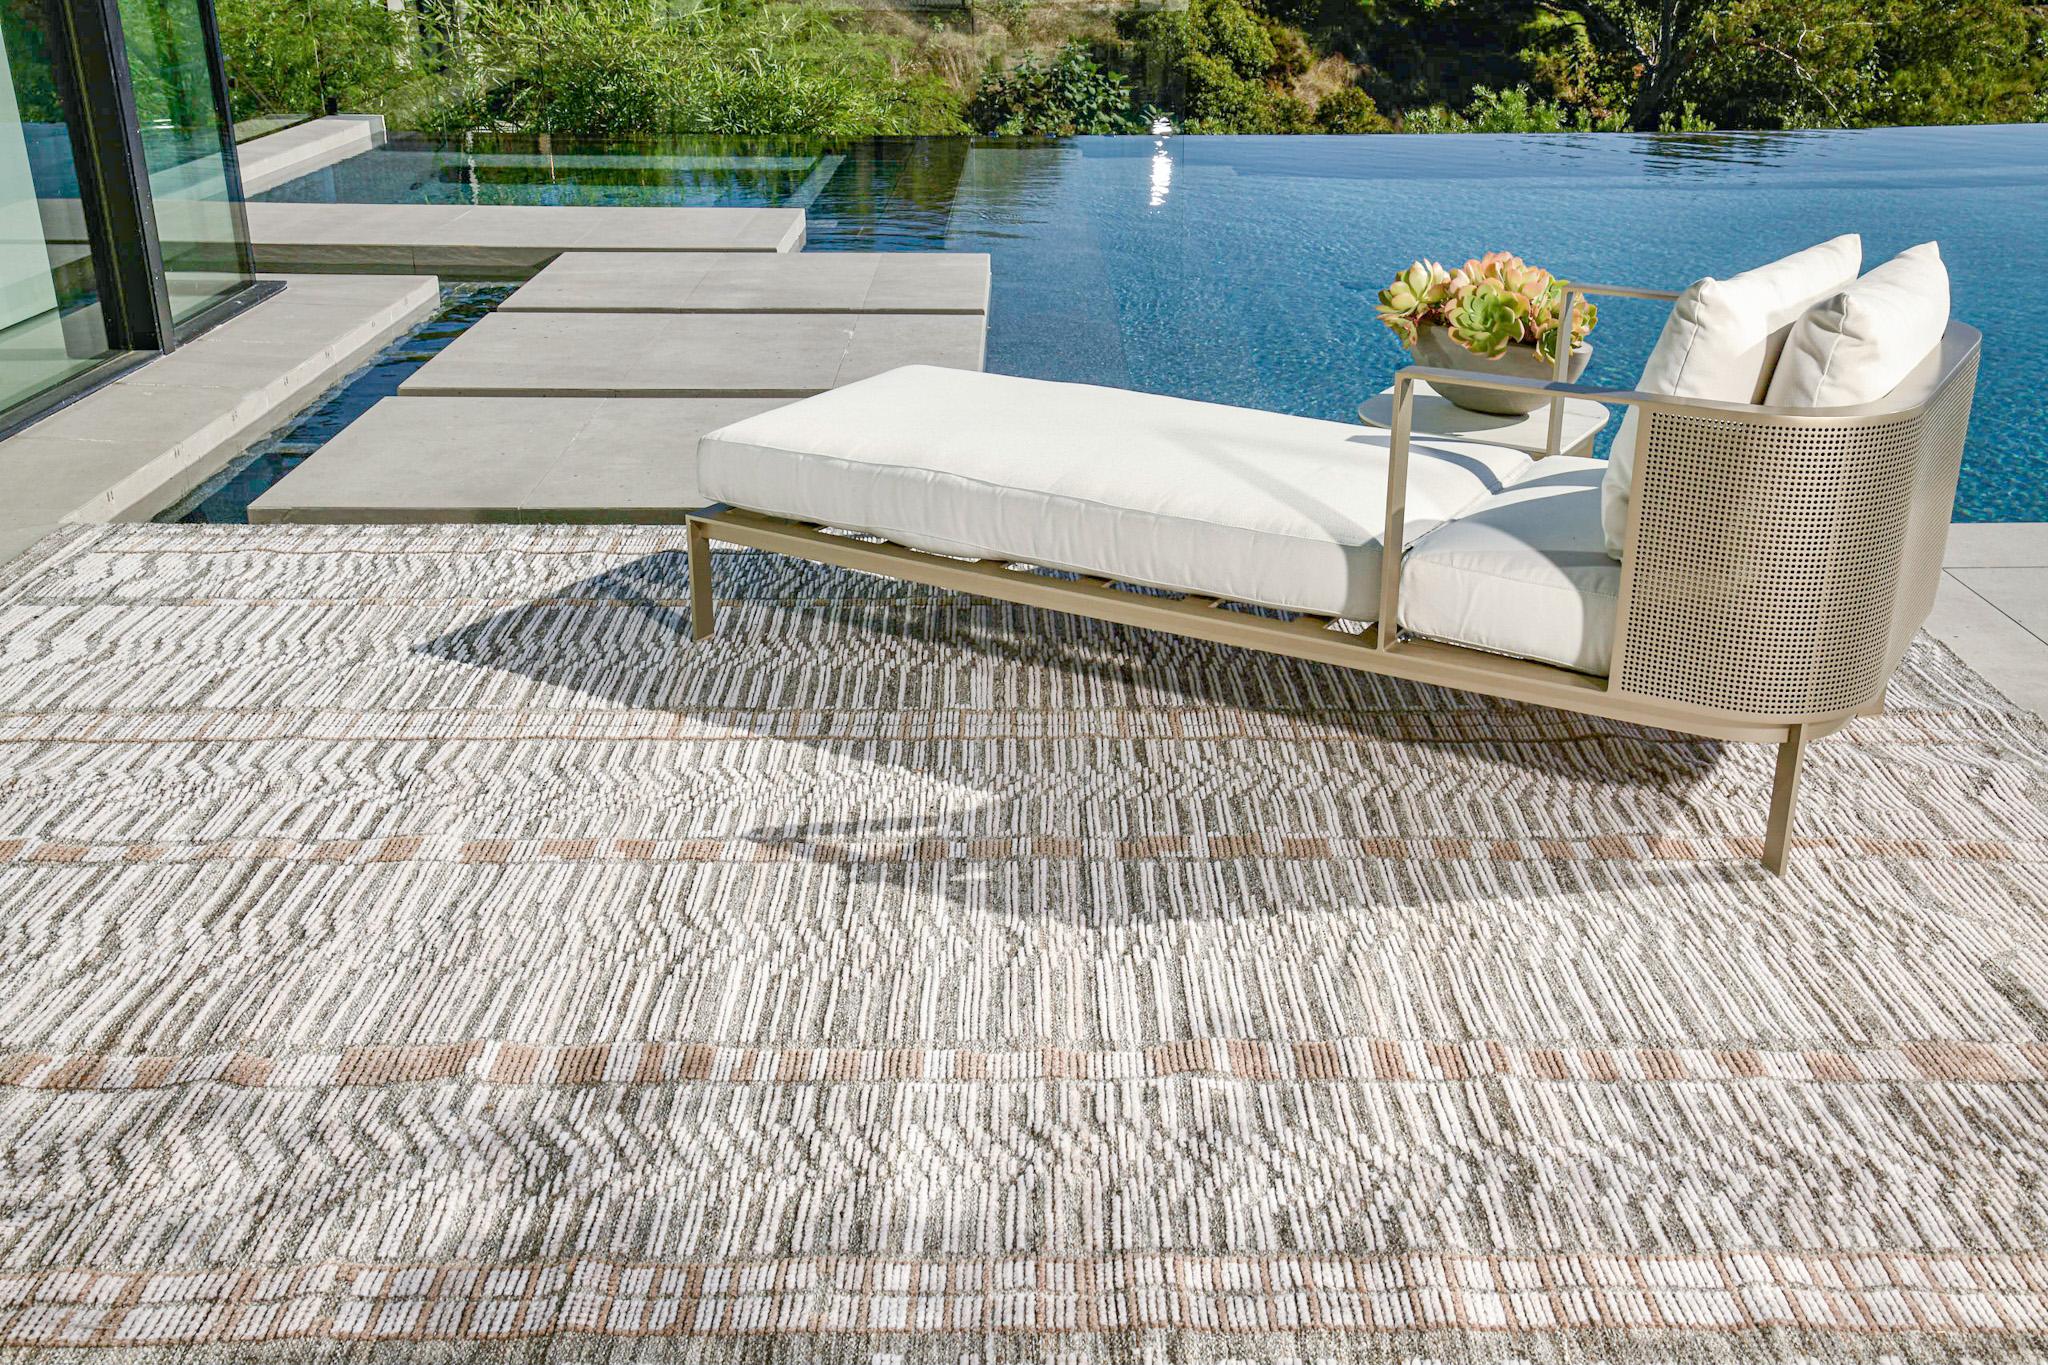 Enjoy the fresh air with Nasim, rugs that work indoors and out.

Rug Number
31446
Size
9' 1